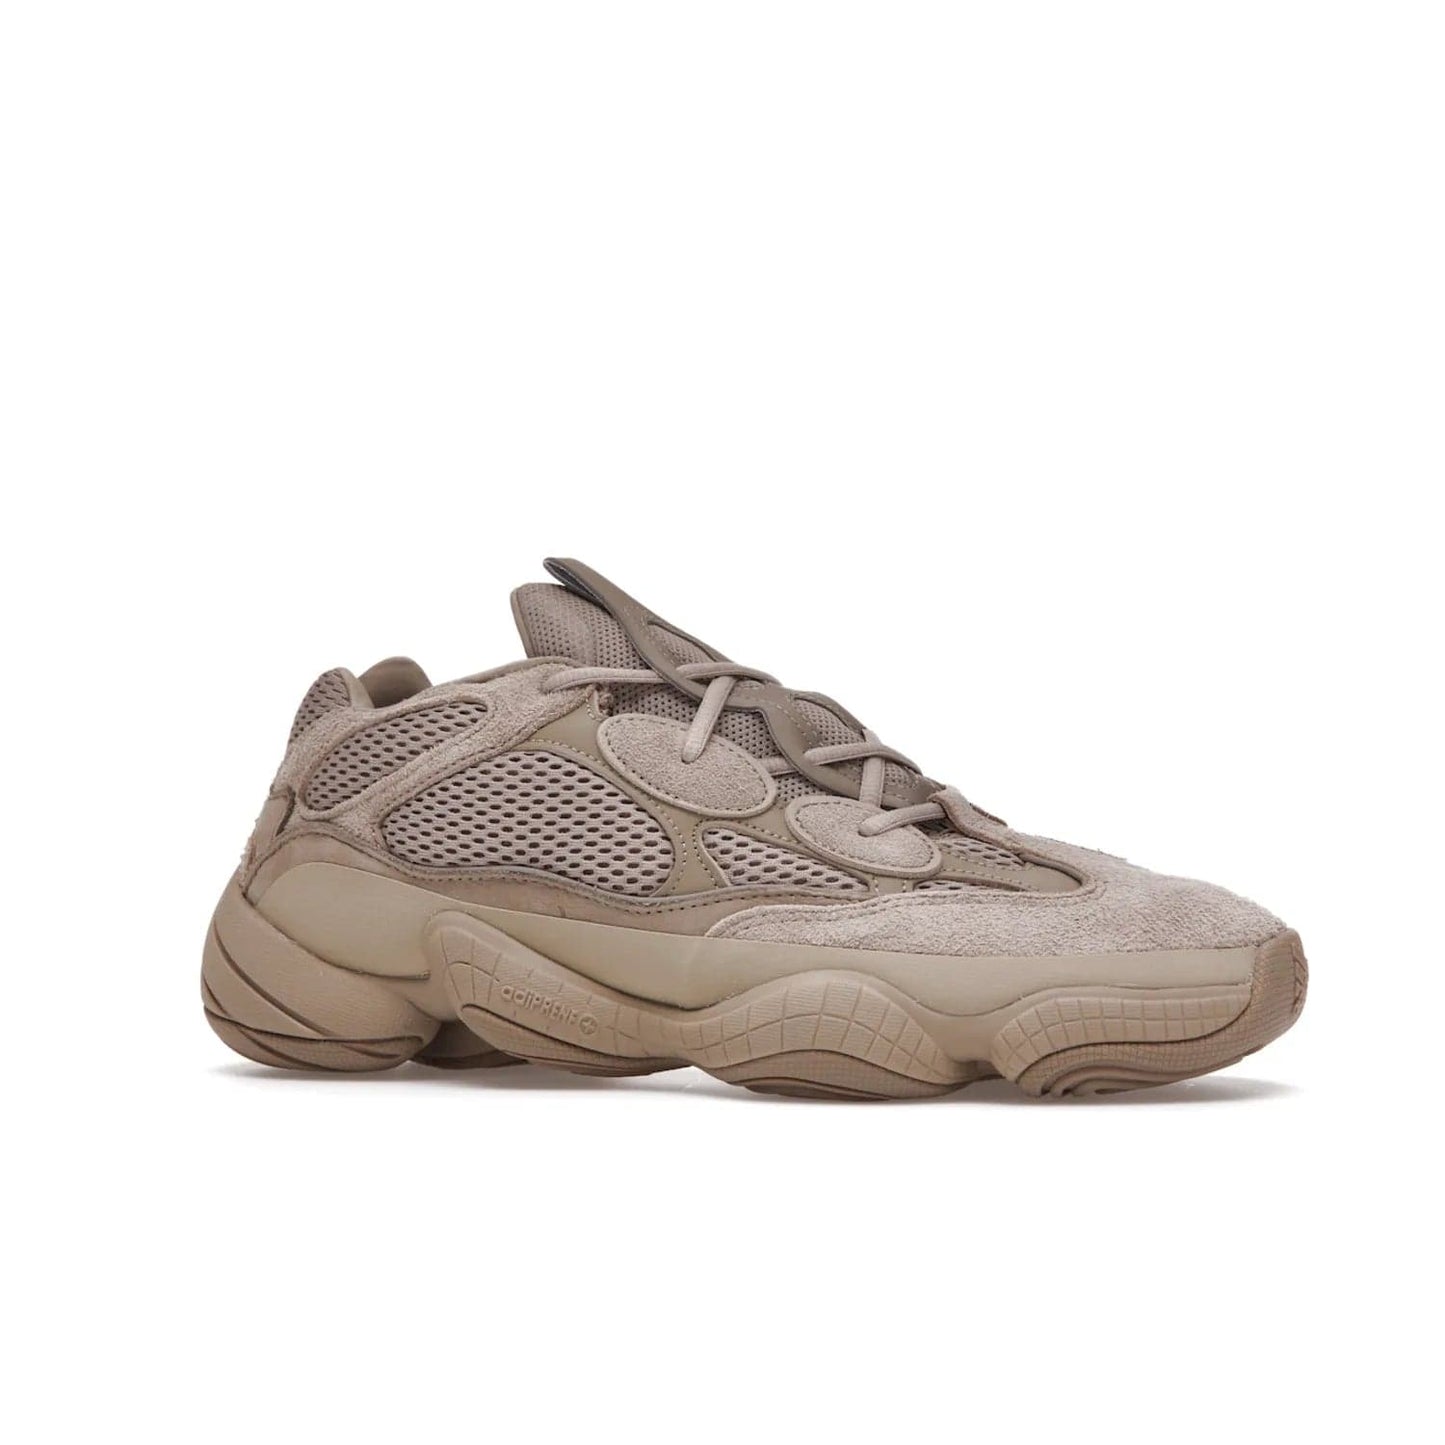 adidas Yeezy 500 Taupe Light - Image 3 - Only at www.BallersClubKickz.com - The adidas Yeezy 500 Taupe Light combines mesh, leather, and suede, with a durable adiPRENE sole for an eye-catching accessory. Reflective piping adds the perfect finishing touches to this unique silhouette. Ideal for any wardrobe, releasing in June 2021.